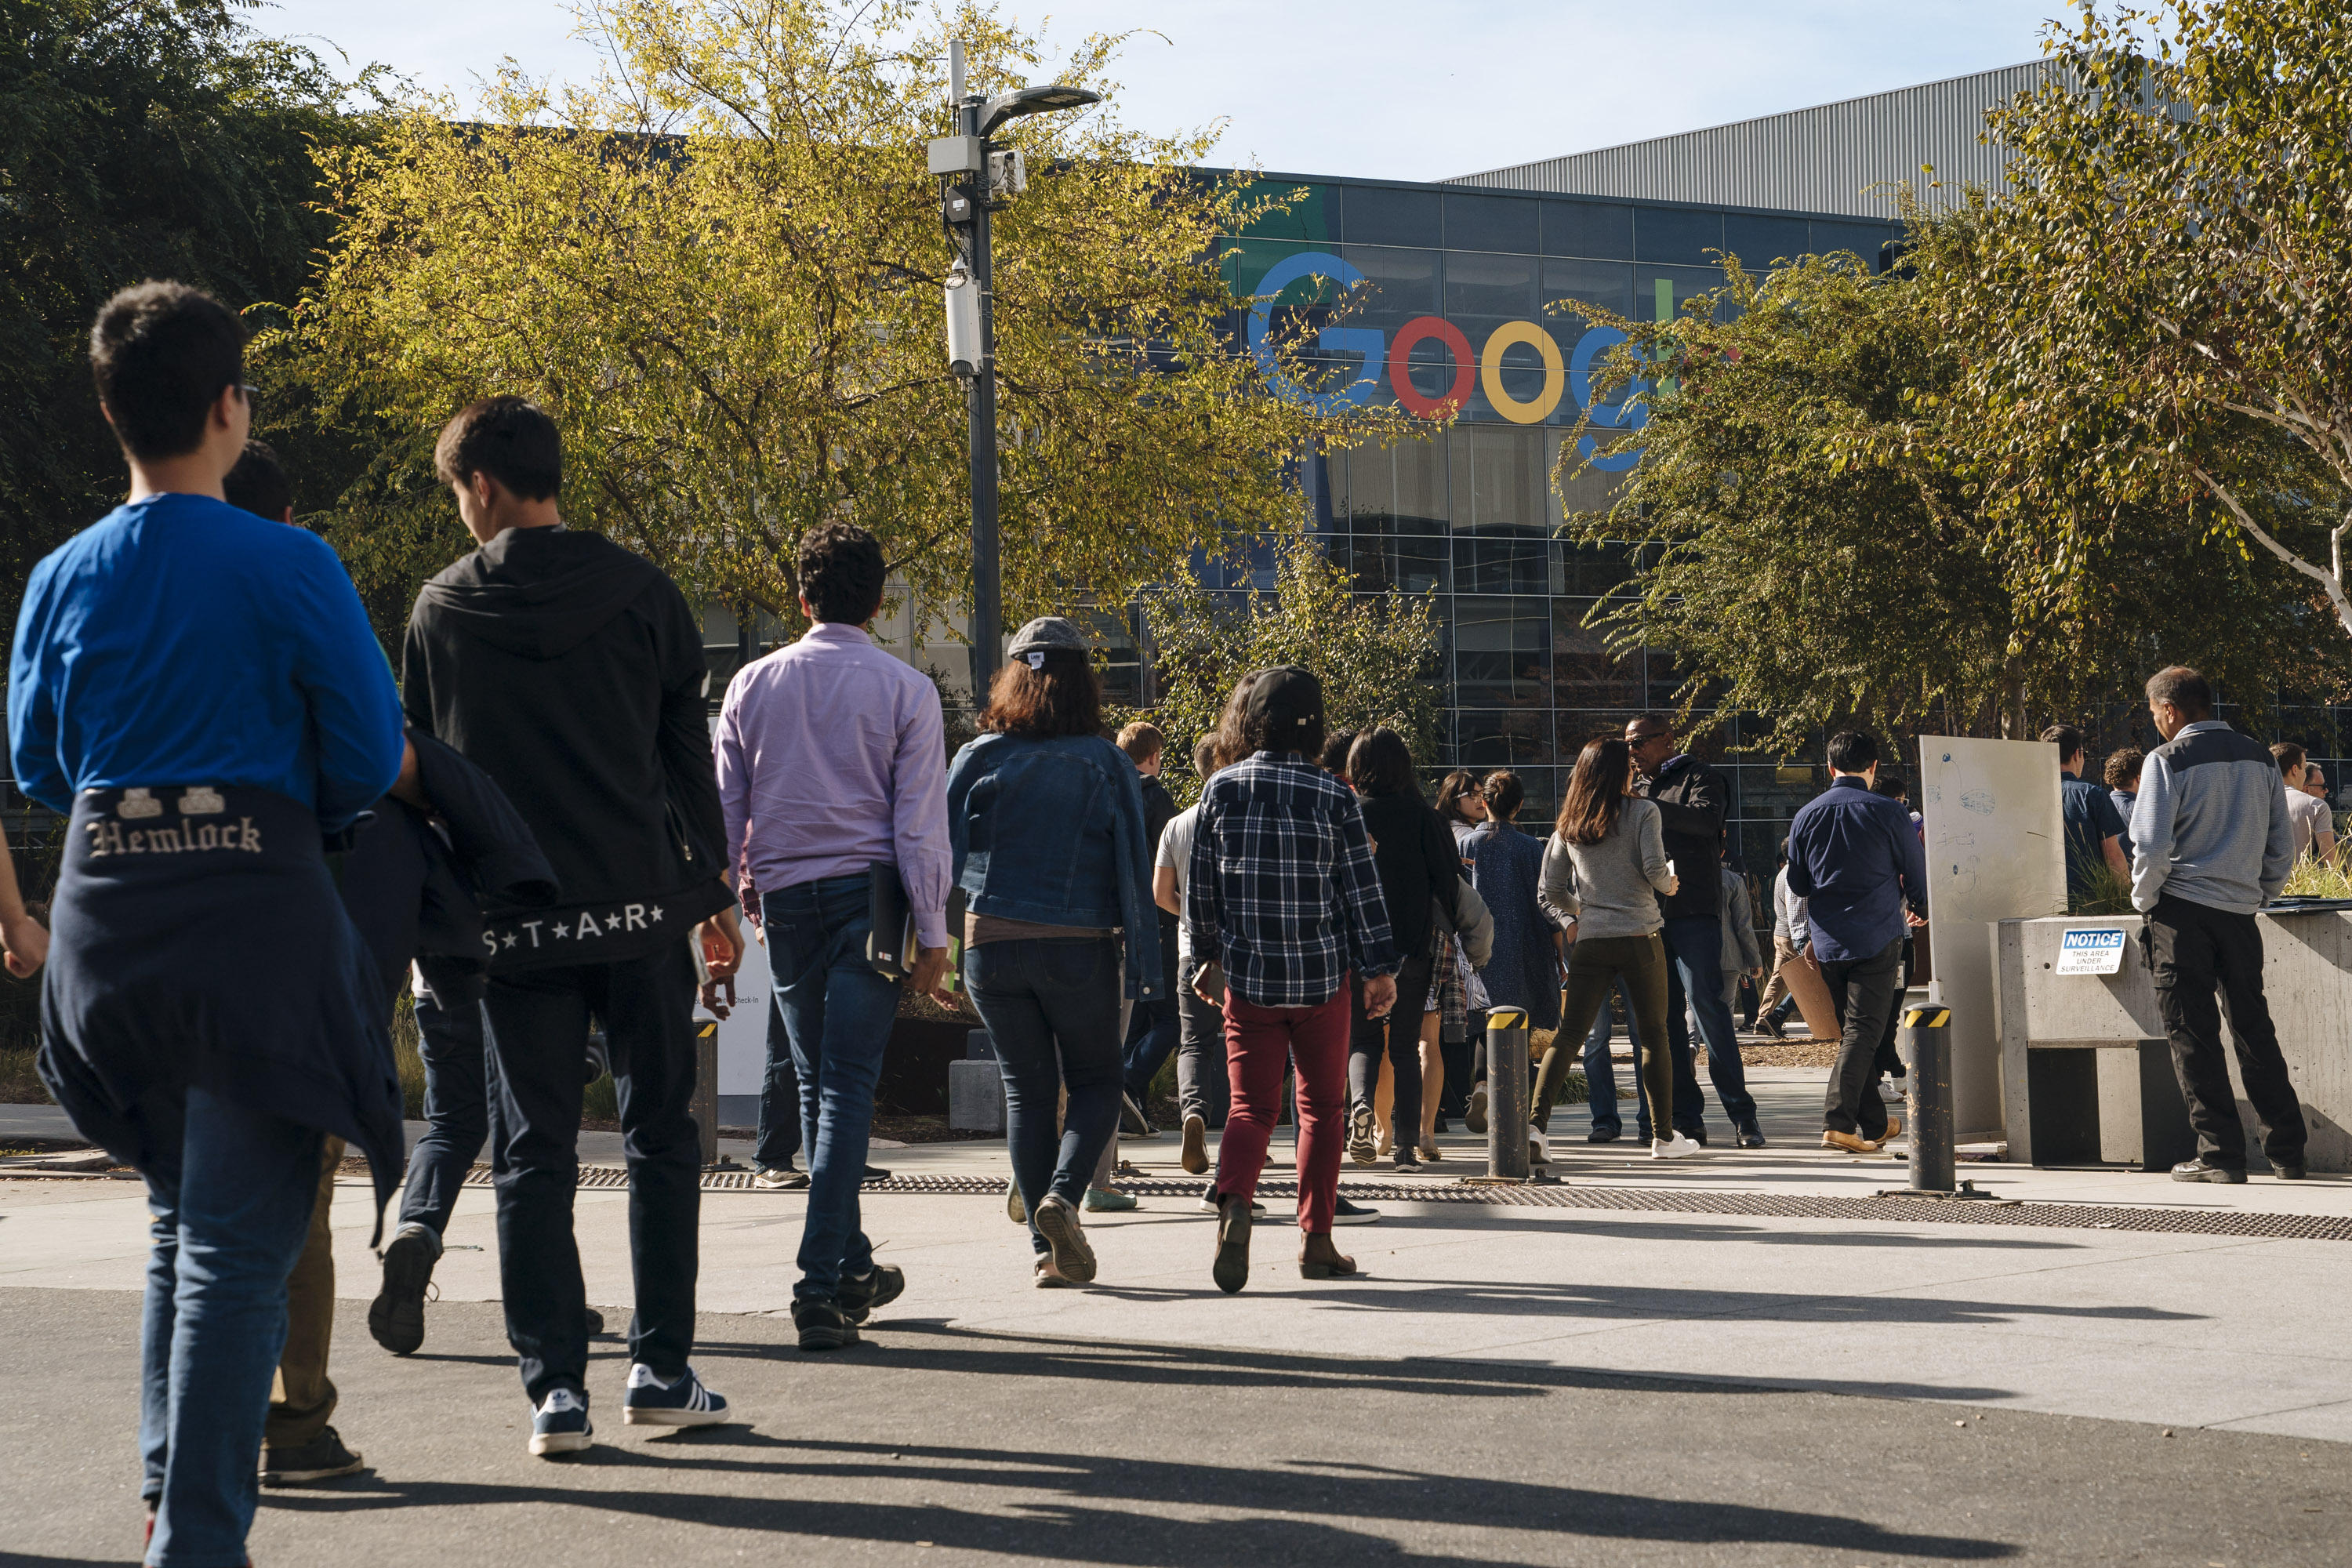 Google employees walked out of their office building to protest the company’s handling of sexual misconduct claims.